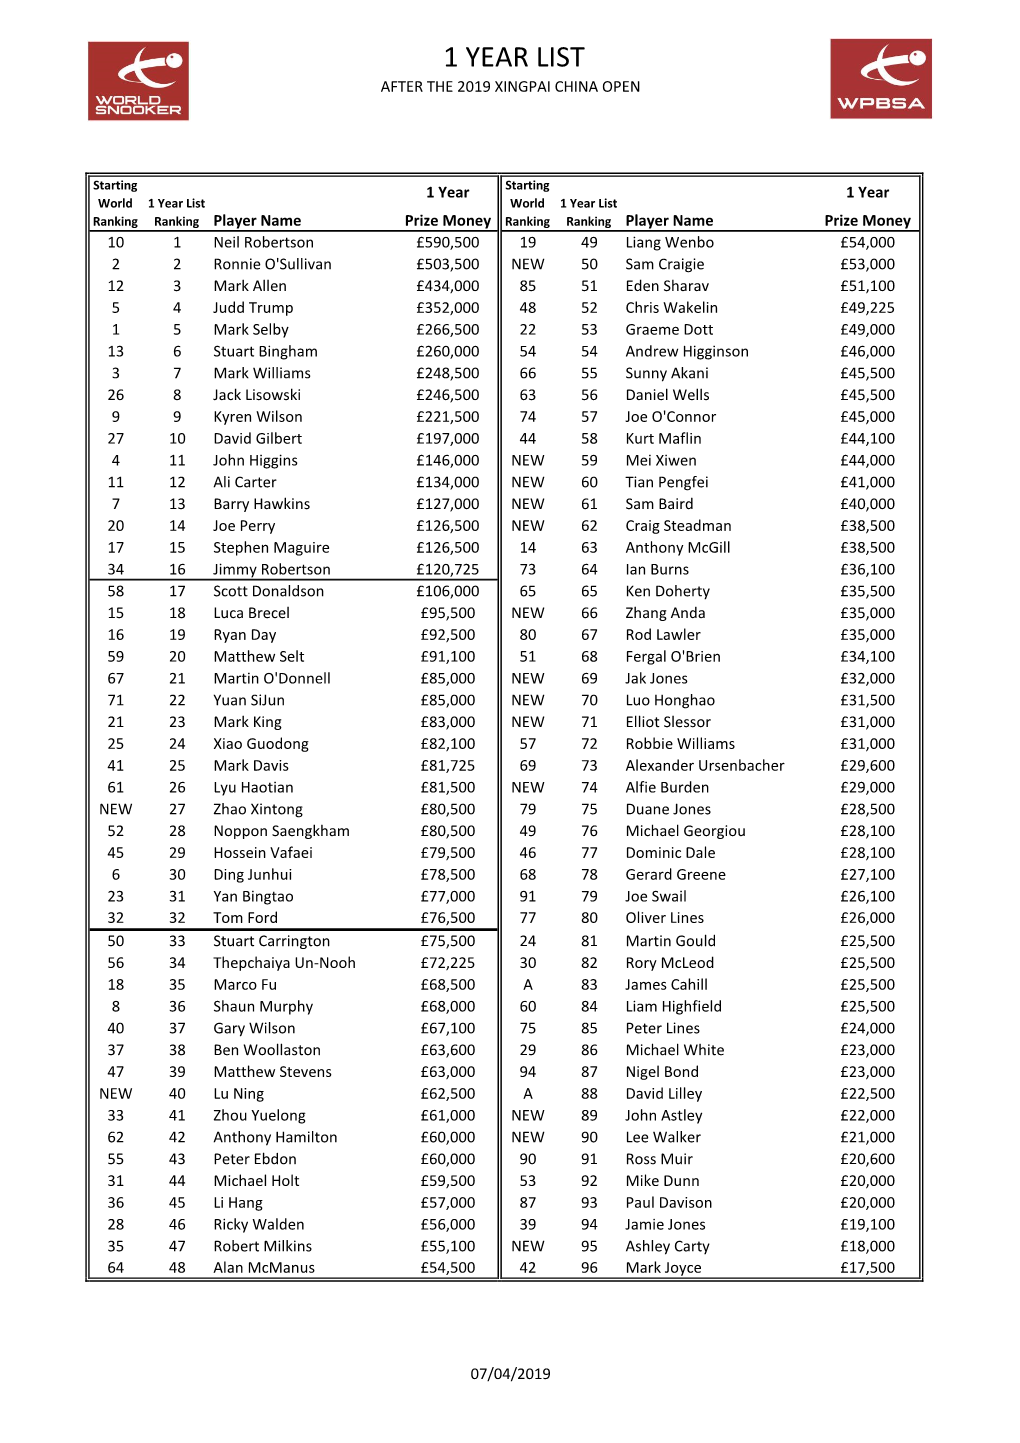 1 Year List After 2019 China Open